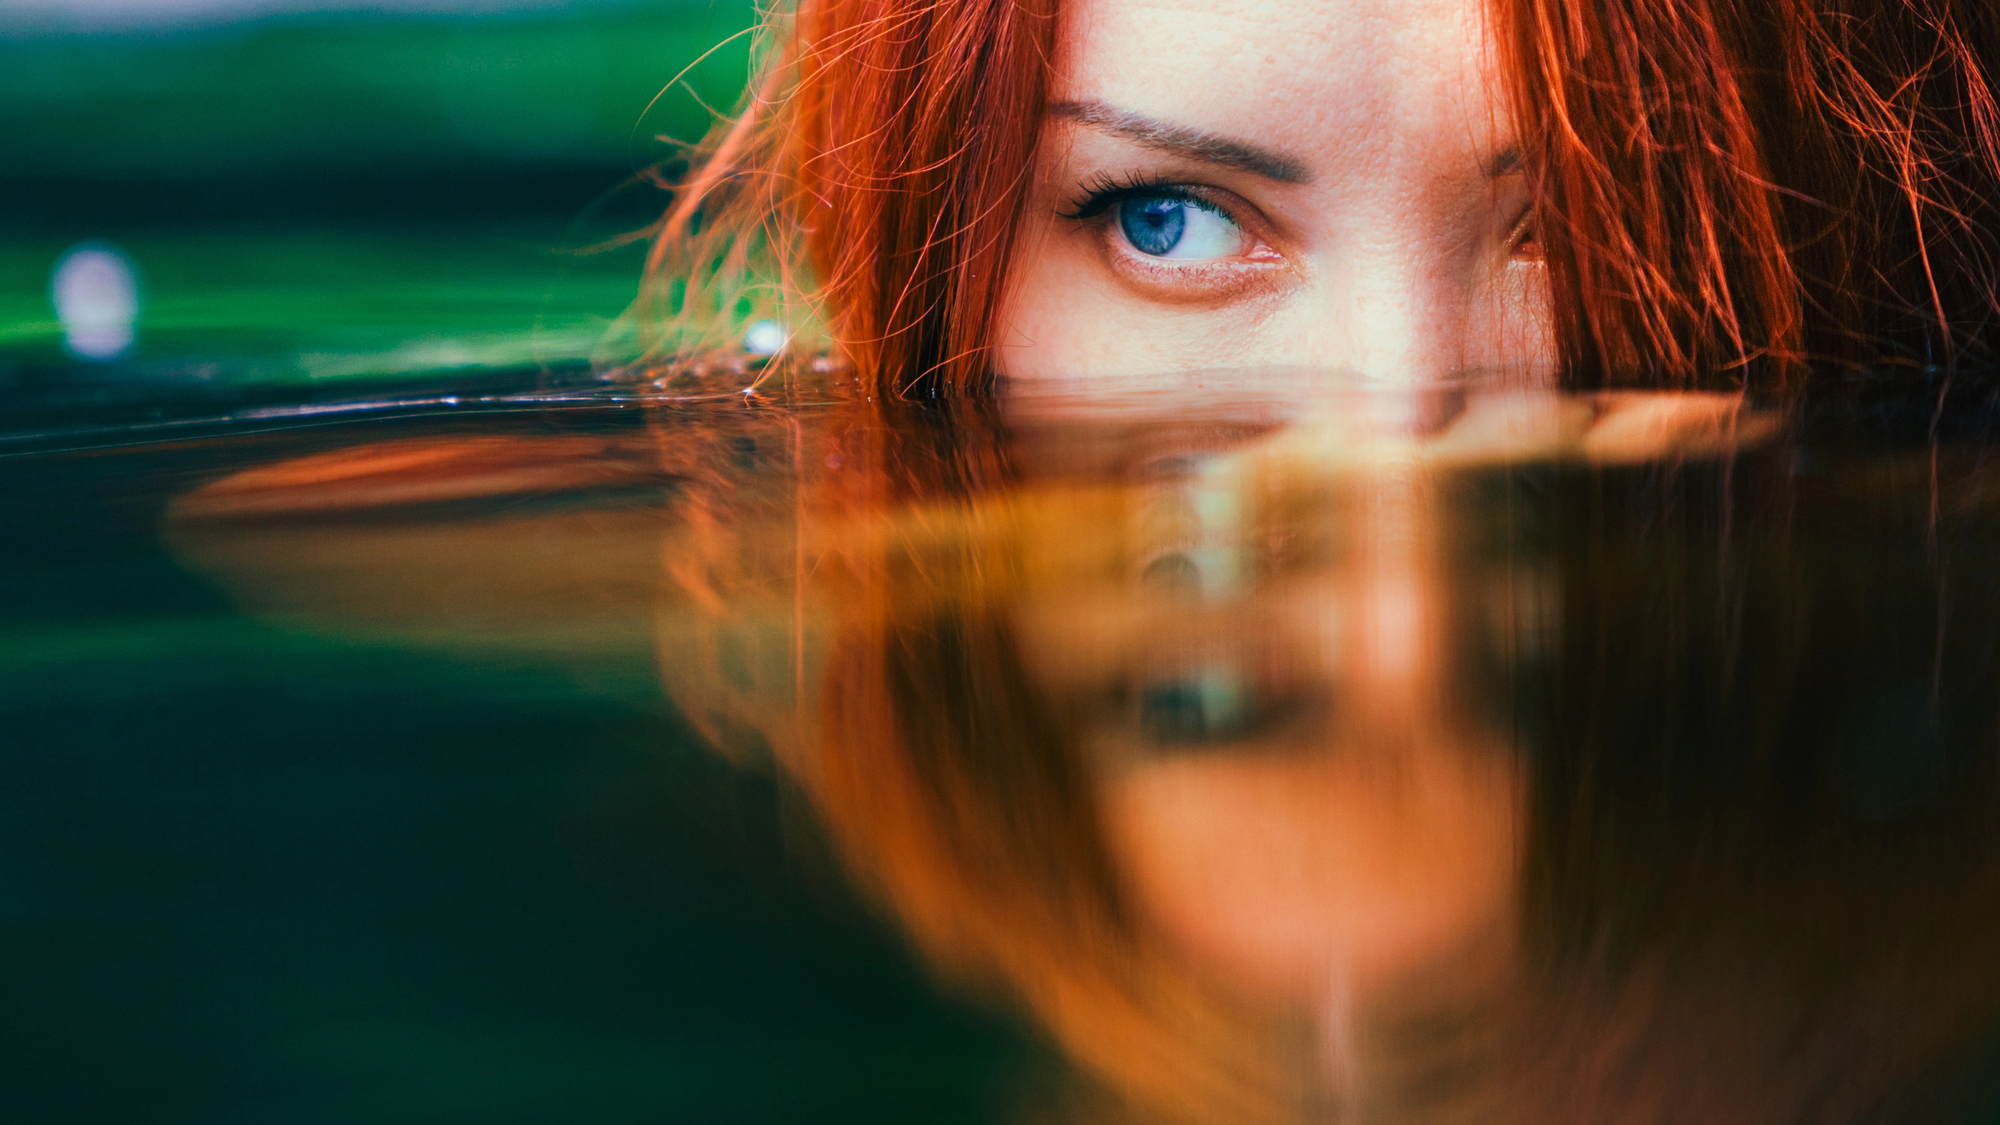 A close-up of a person with red hair partially submerged in water. They have one visible blue eye peeking above the water surface, with their reflection mirrored on the water below. The background is a blurred mix of green and blue hues.